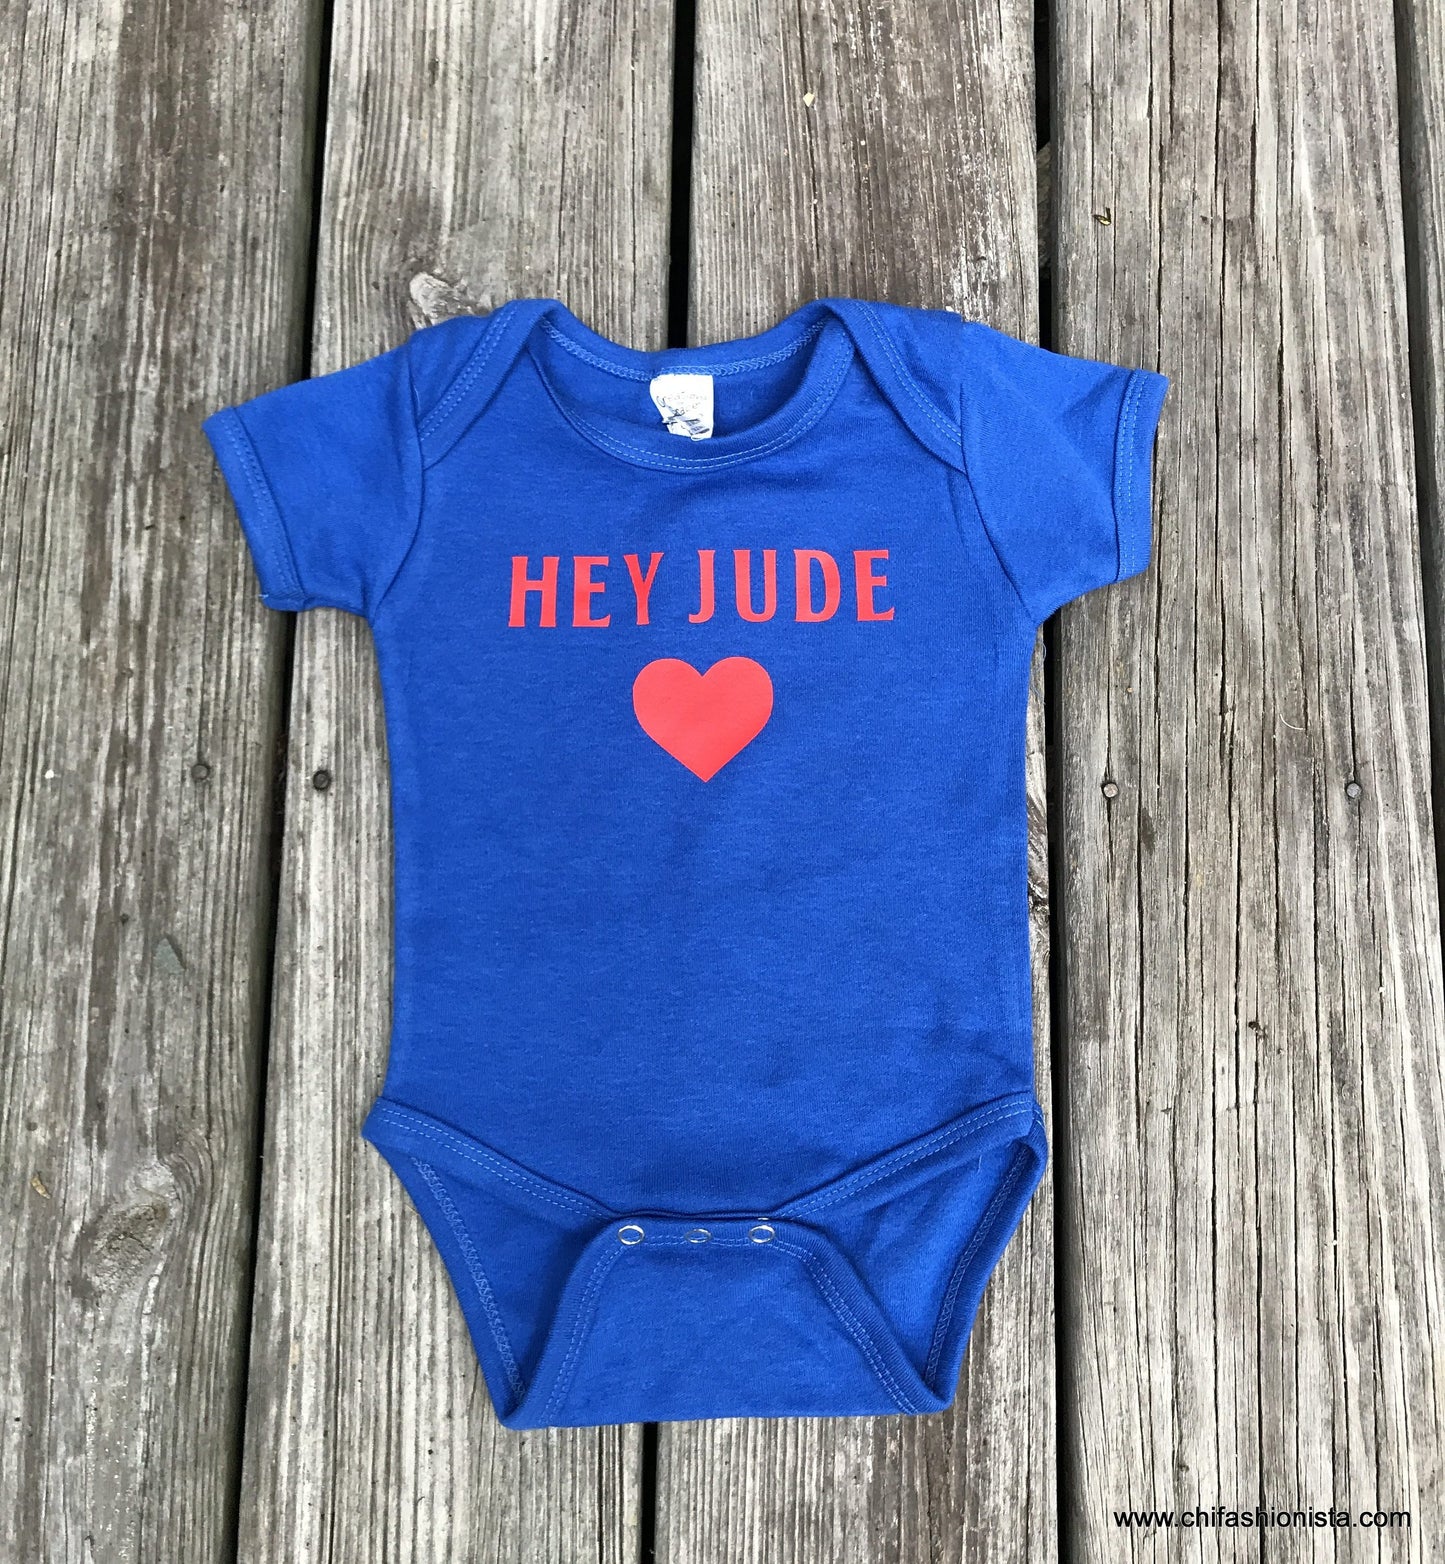 Handcrafted Children's Clothing, Clothing for Children and Parents, Hey Jude Shirt, chi-fashionista